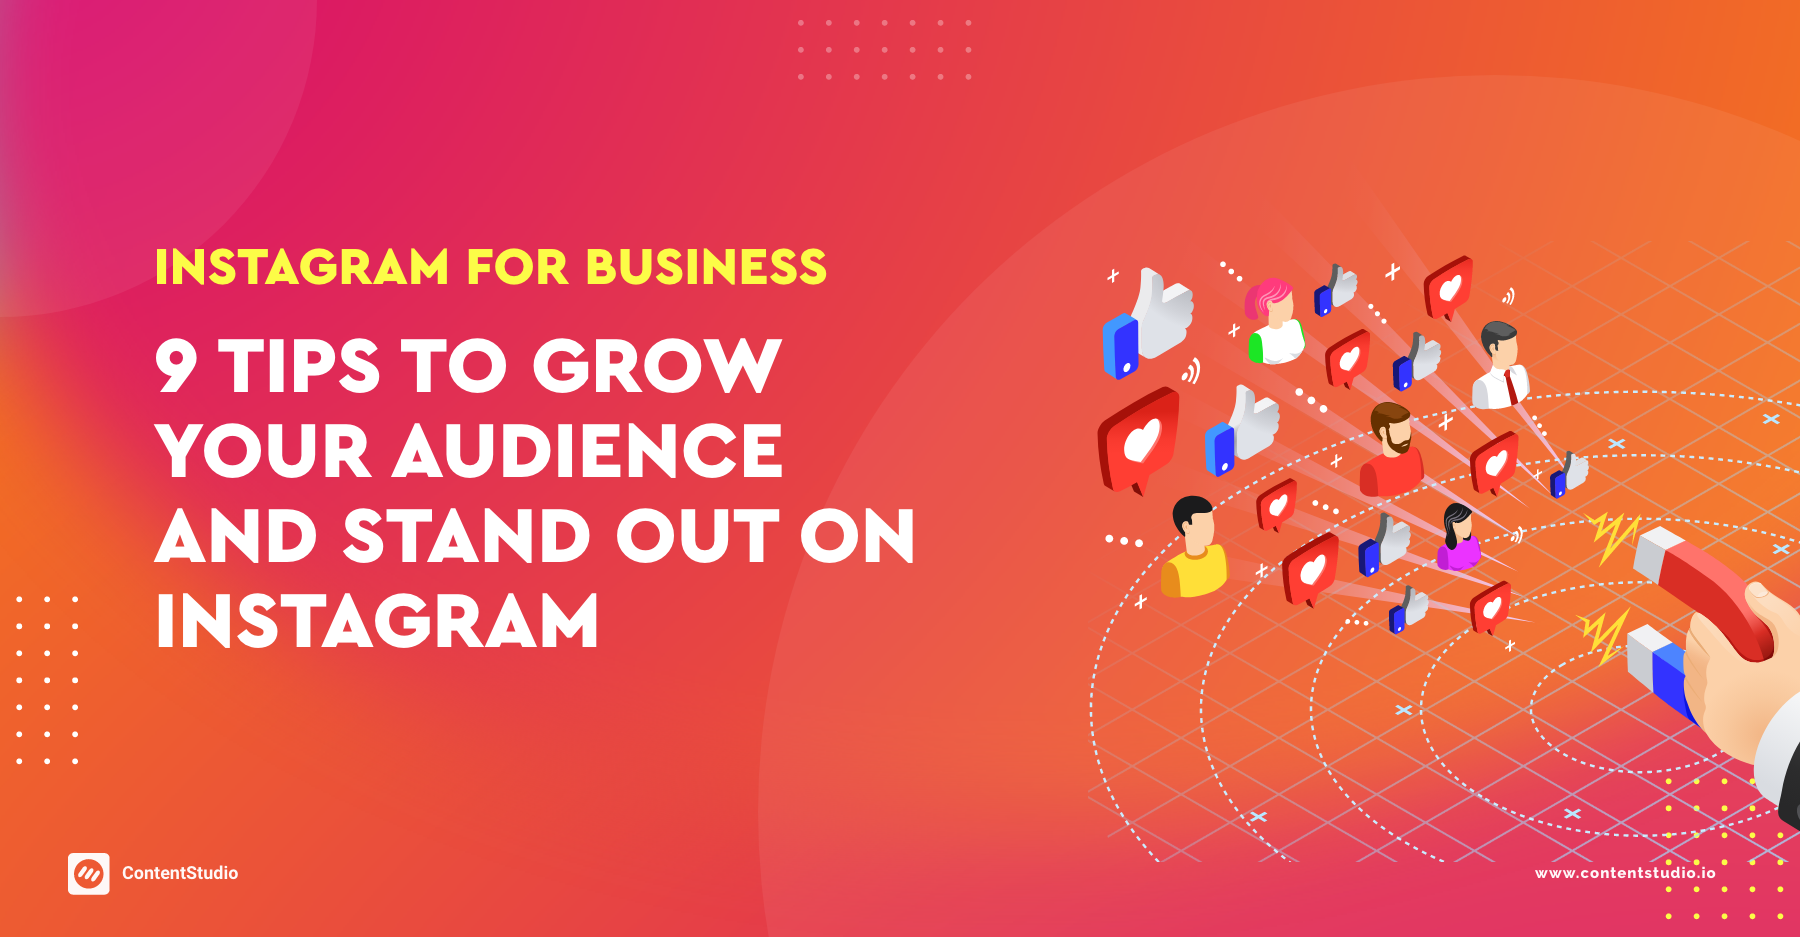 Instagram for Business: 9 Tips to Grow Your Audience and Stand Out on Instagram